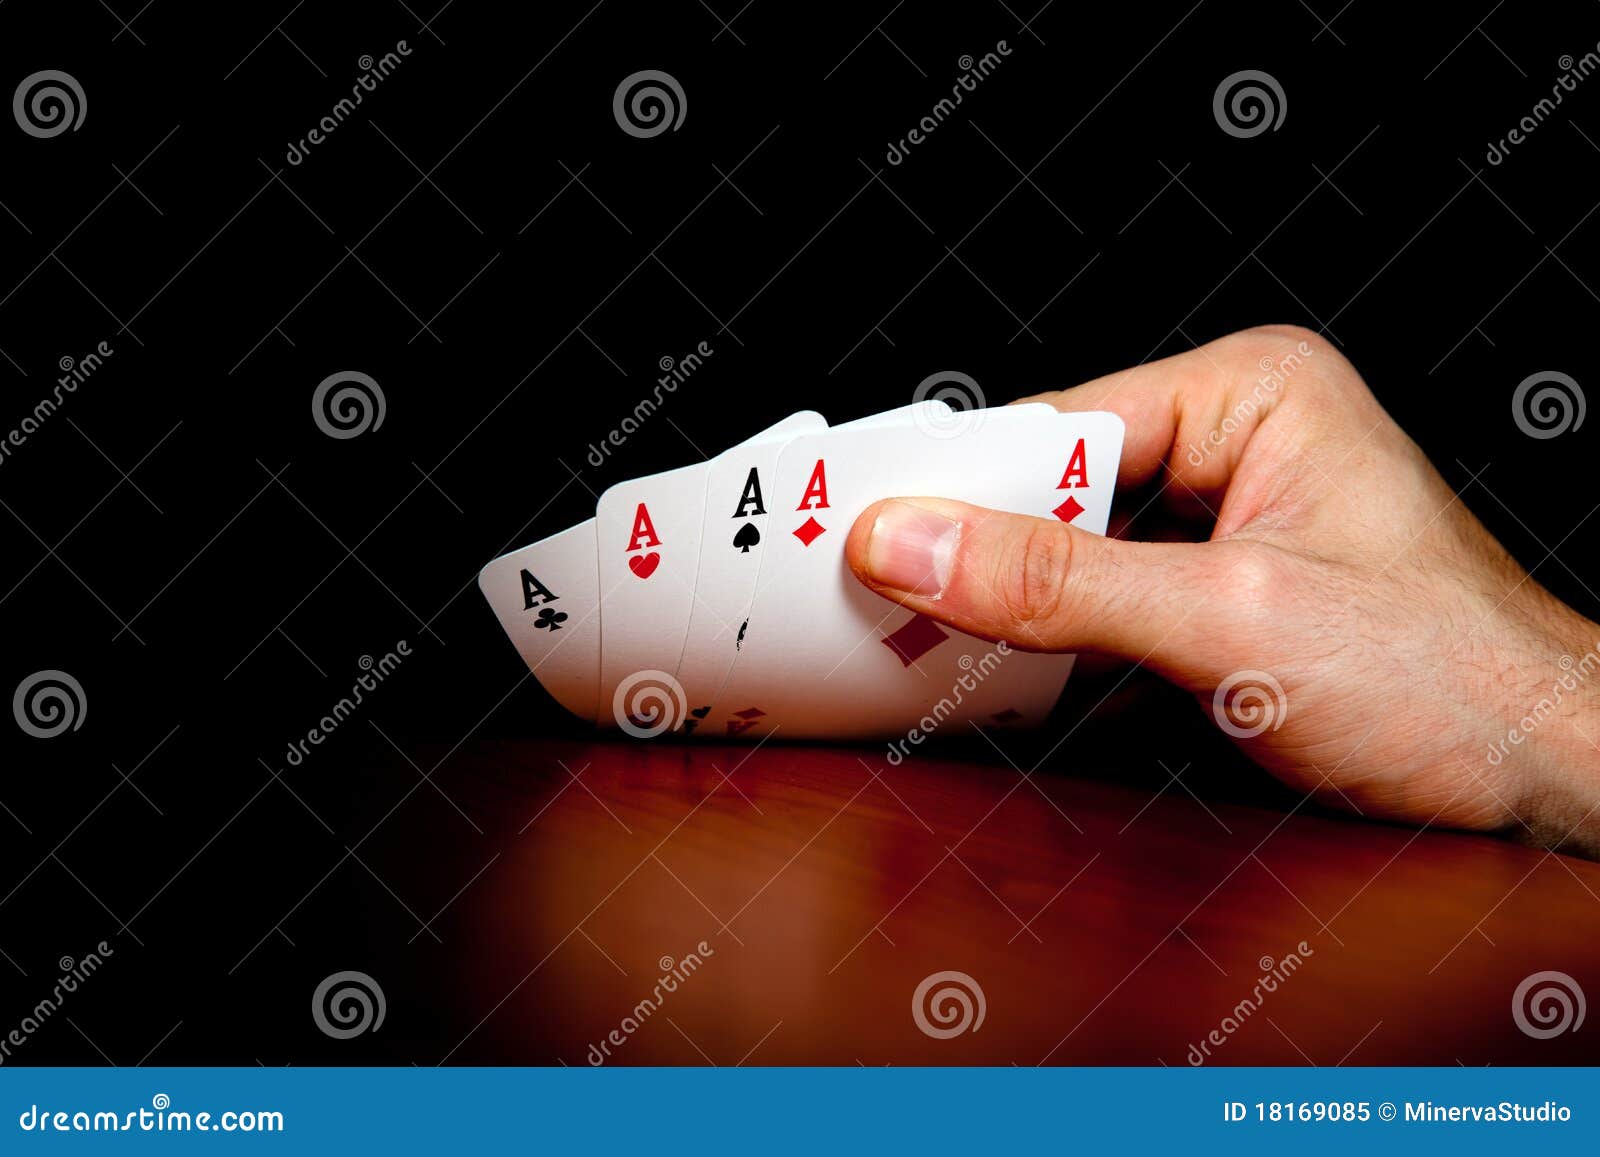 Four aces hand stock image. Image of lucky, poker, amusement - 18169085